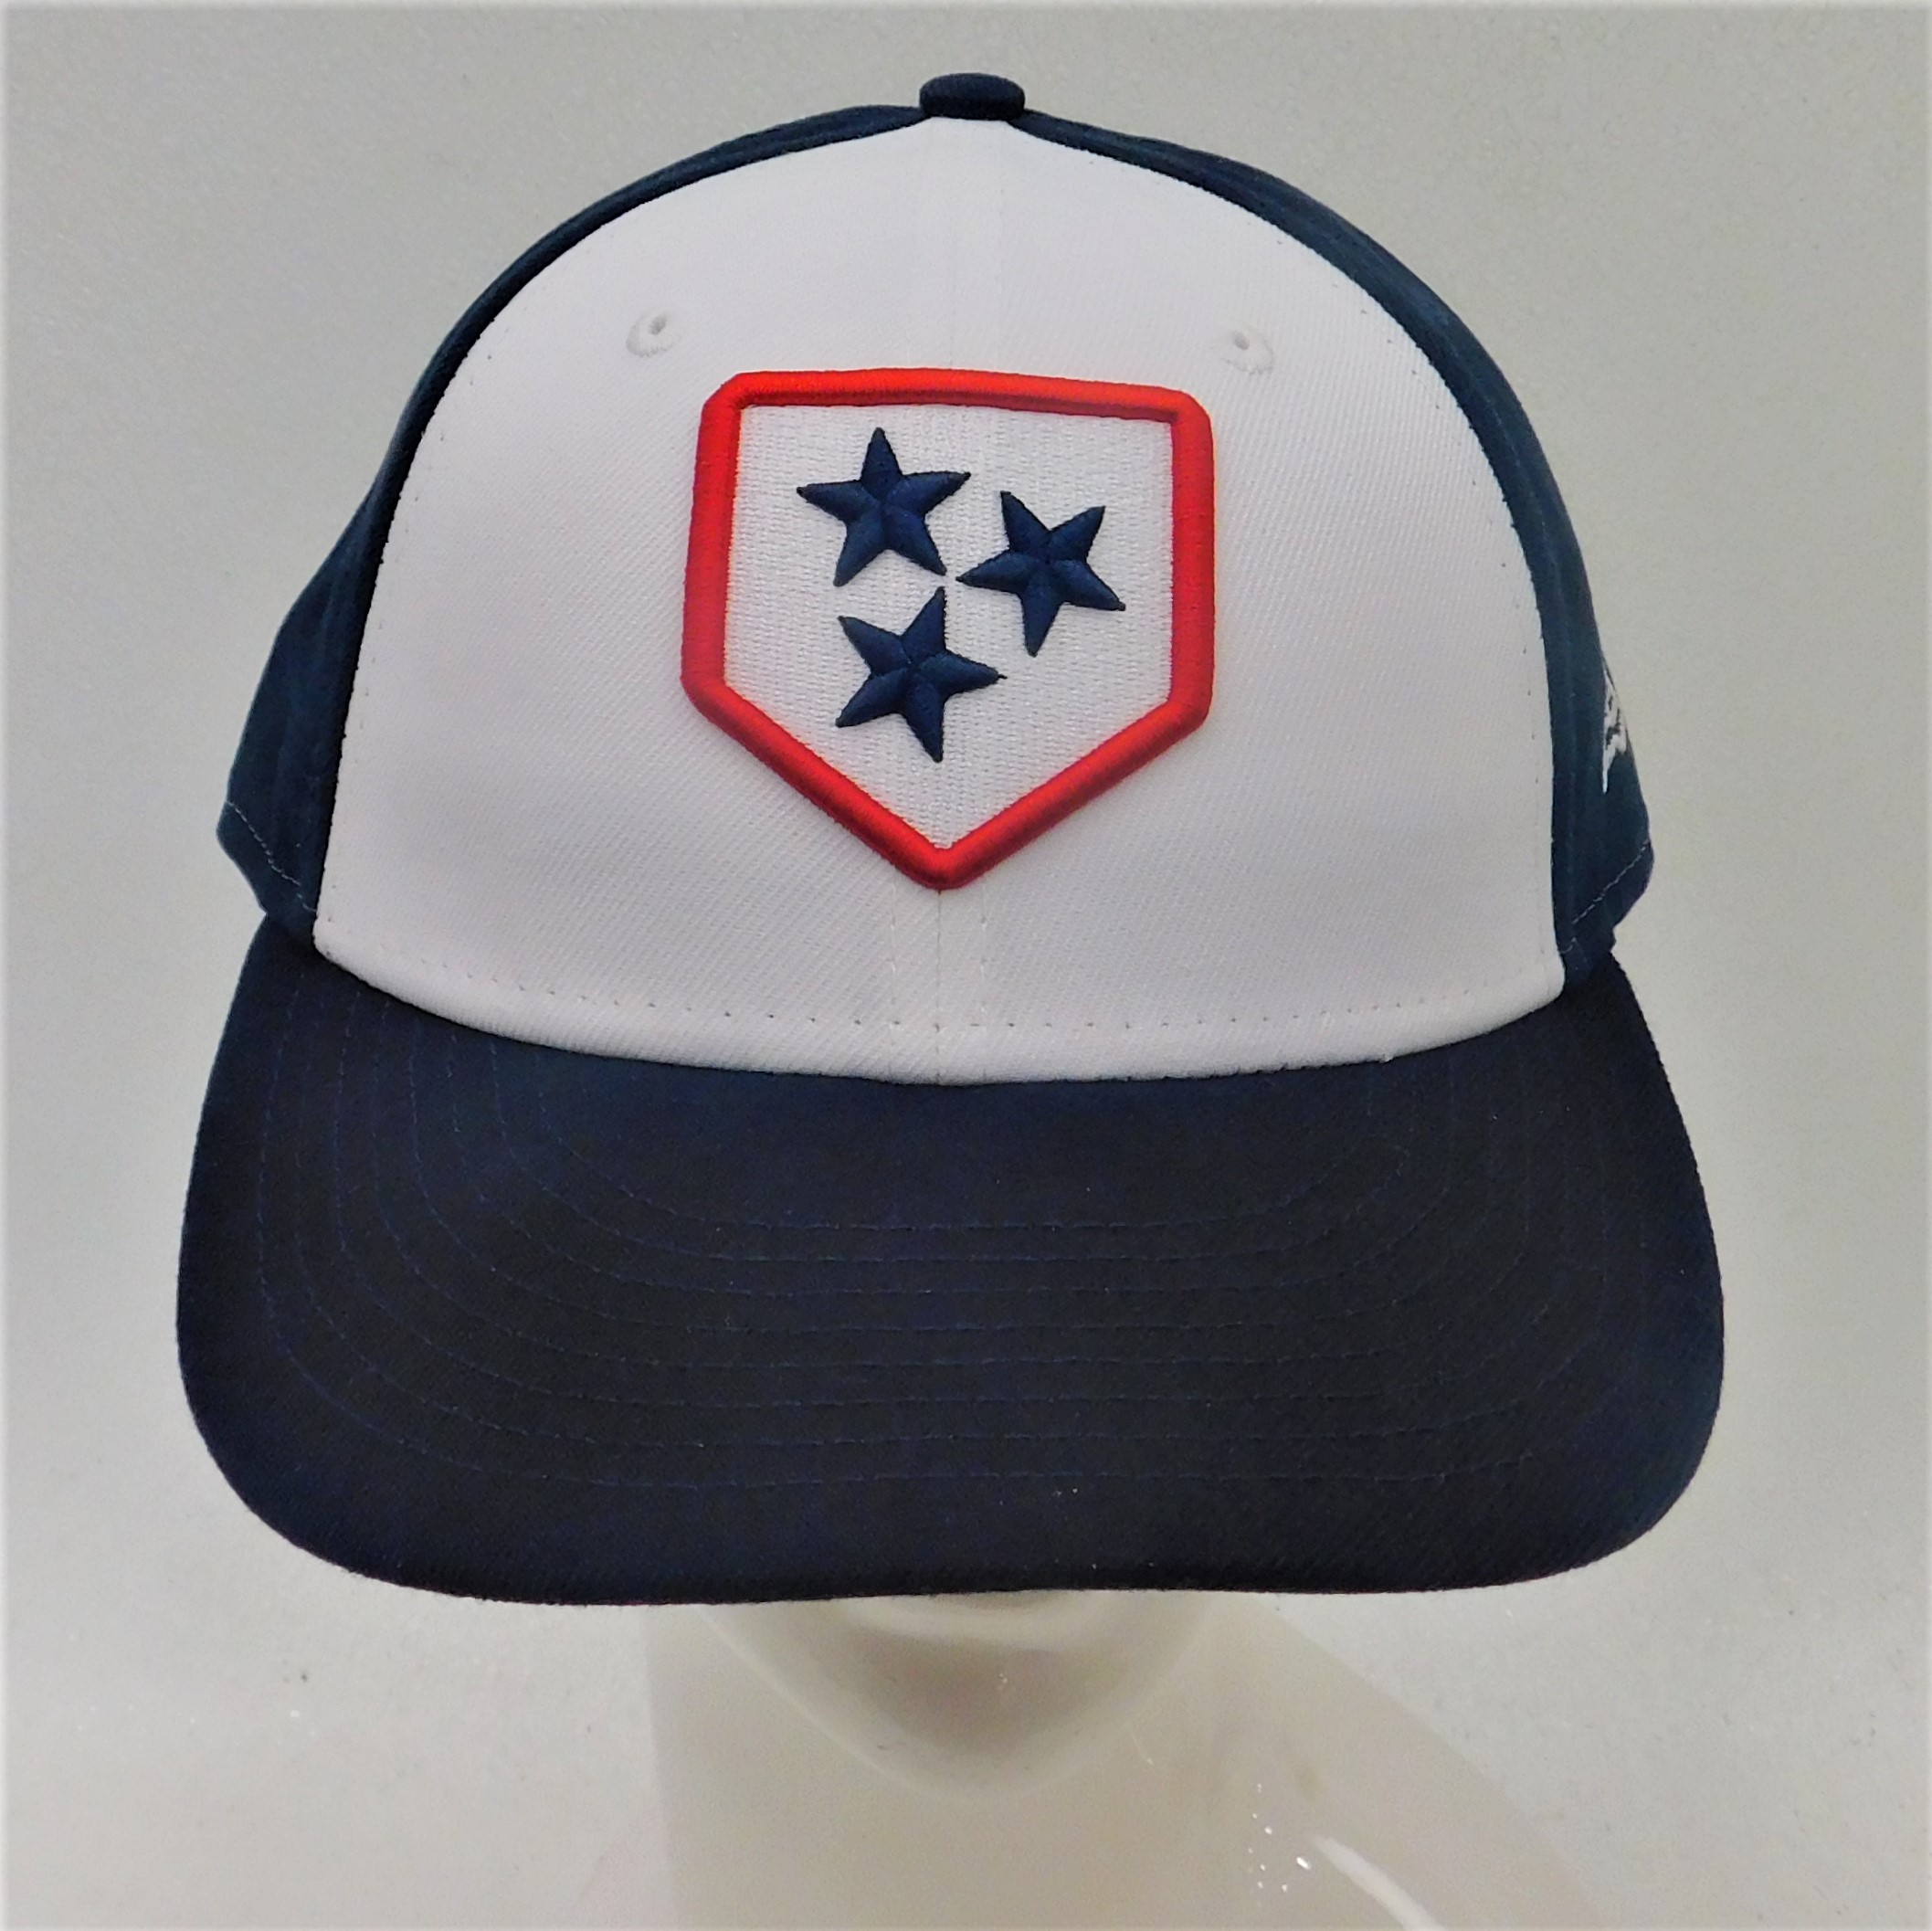 NEW VINTAGE TEXAS RANGERS SNAPBACK HAT/CAP WITH ORIGINAL TAGS VERY RARE!!